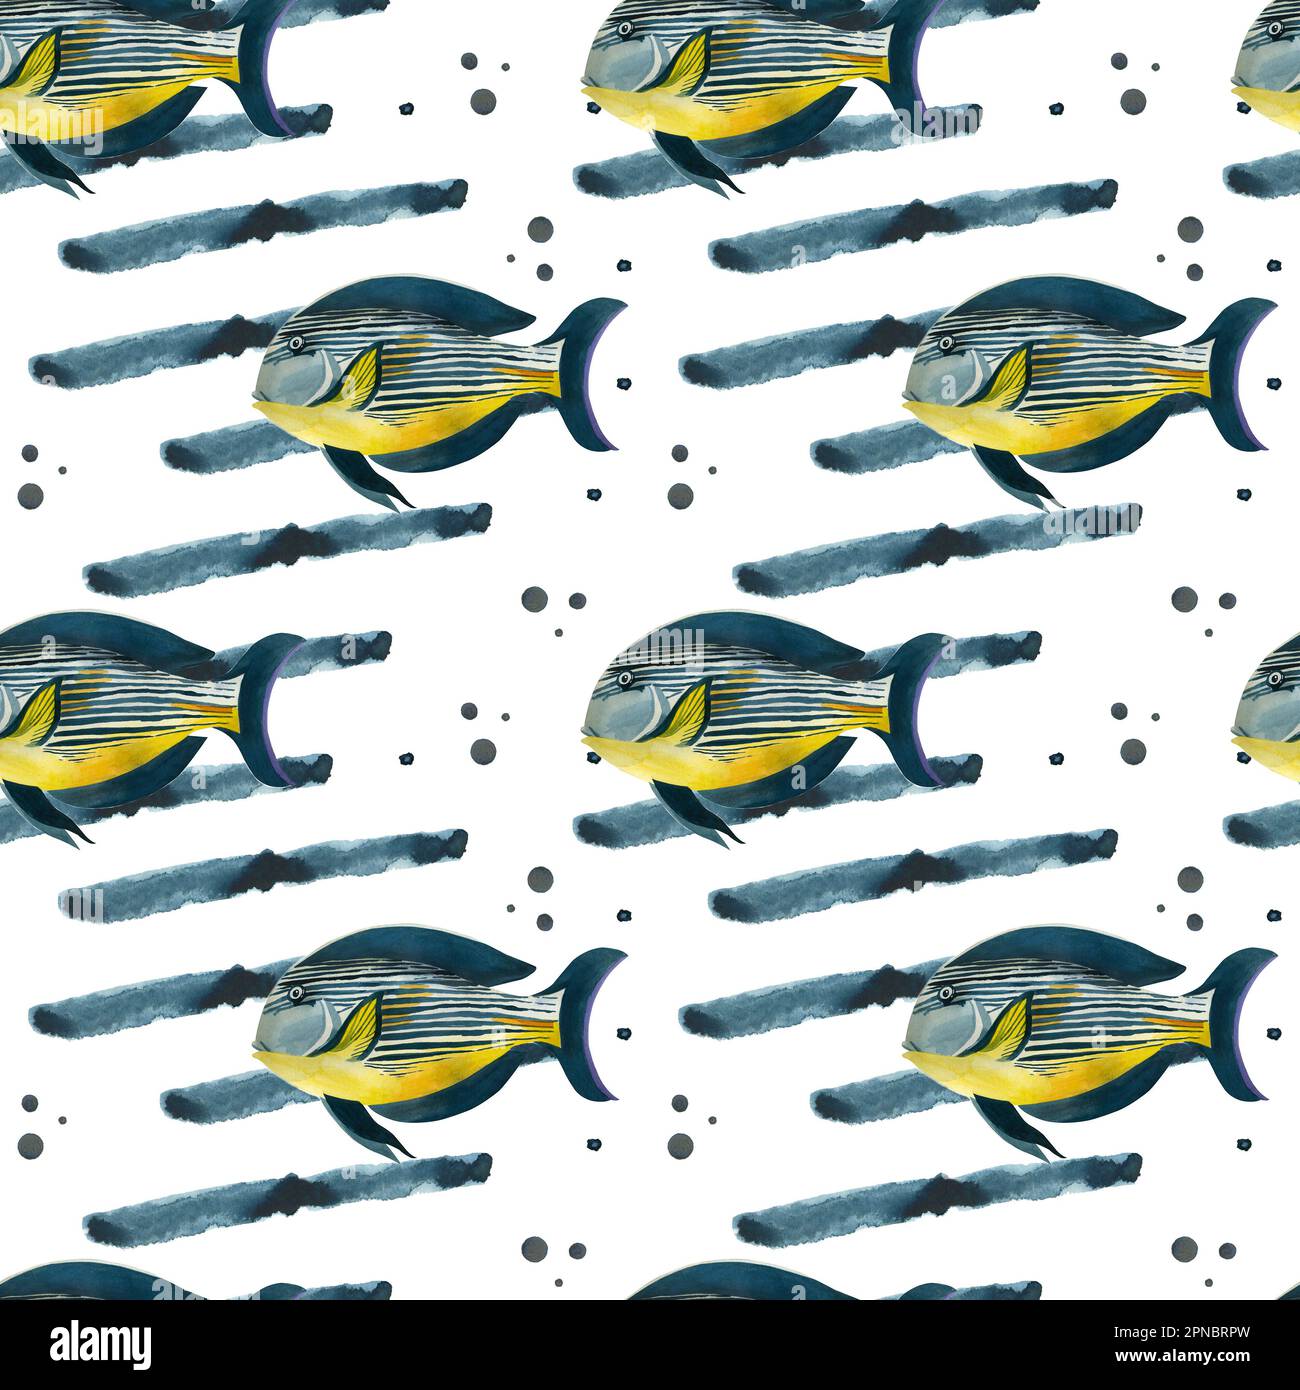 Seamless pattern on the marine theme. Striped fish in blue with yellow and blue stripes, hand-drawn in watercolor on a white background. Suitable for Stock Photo